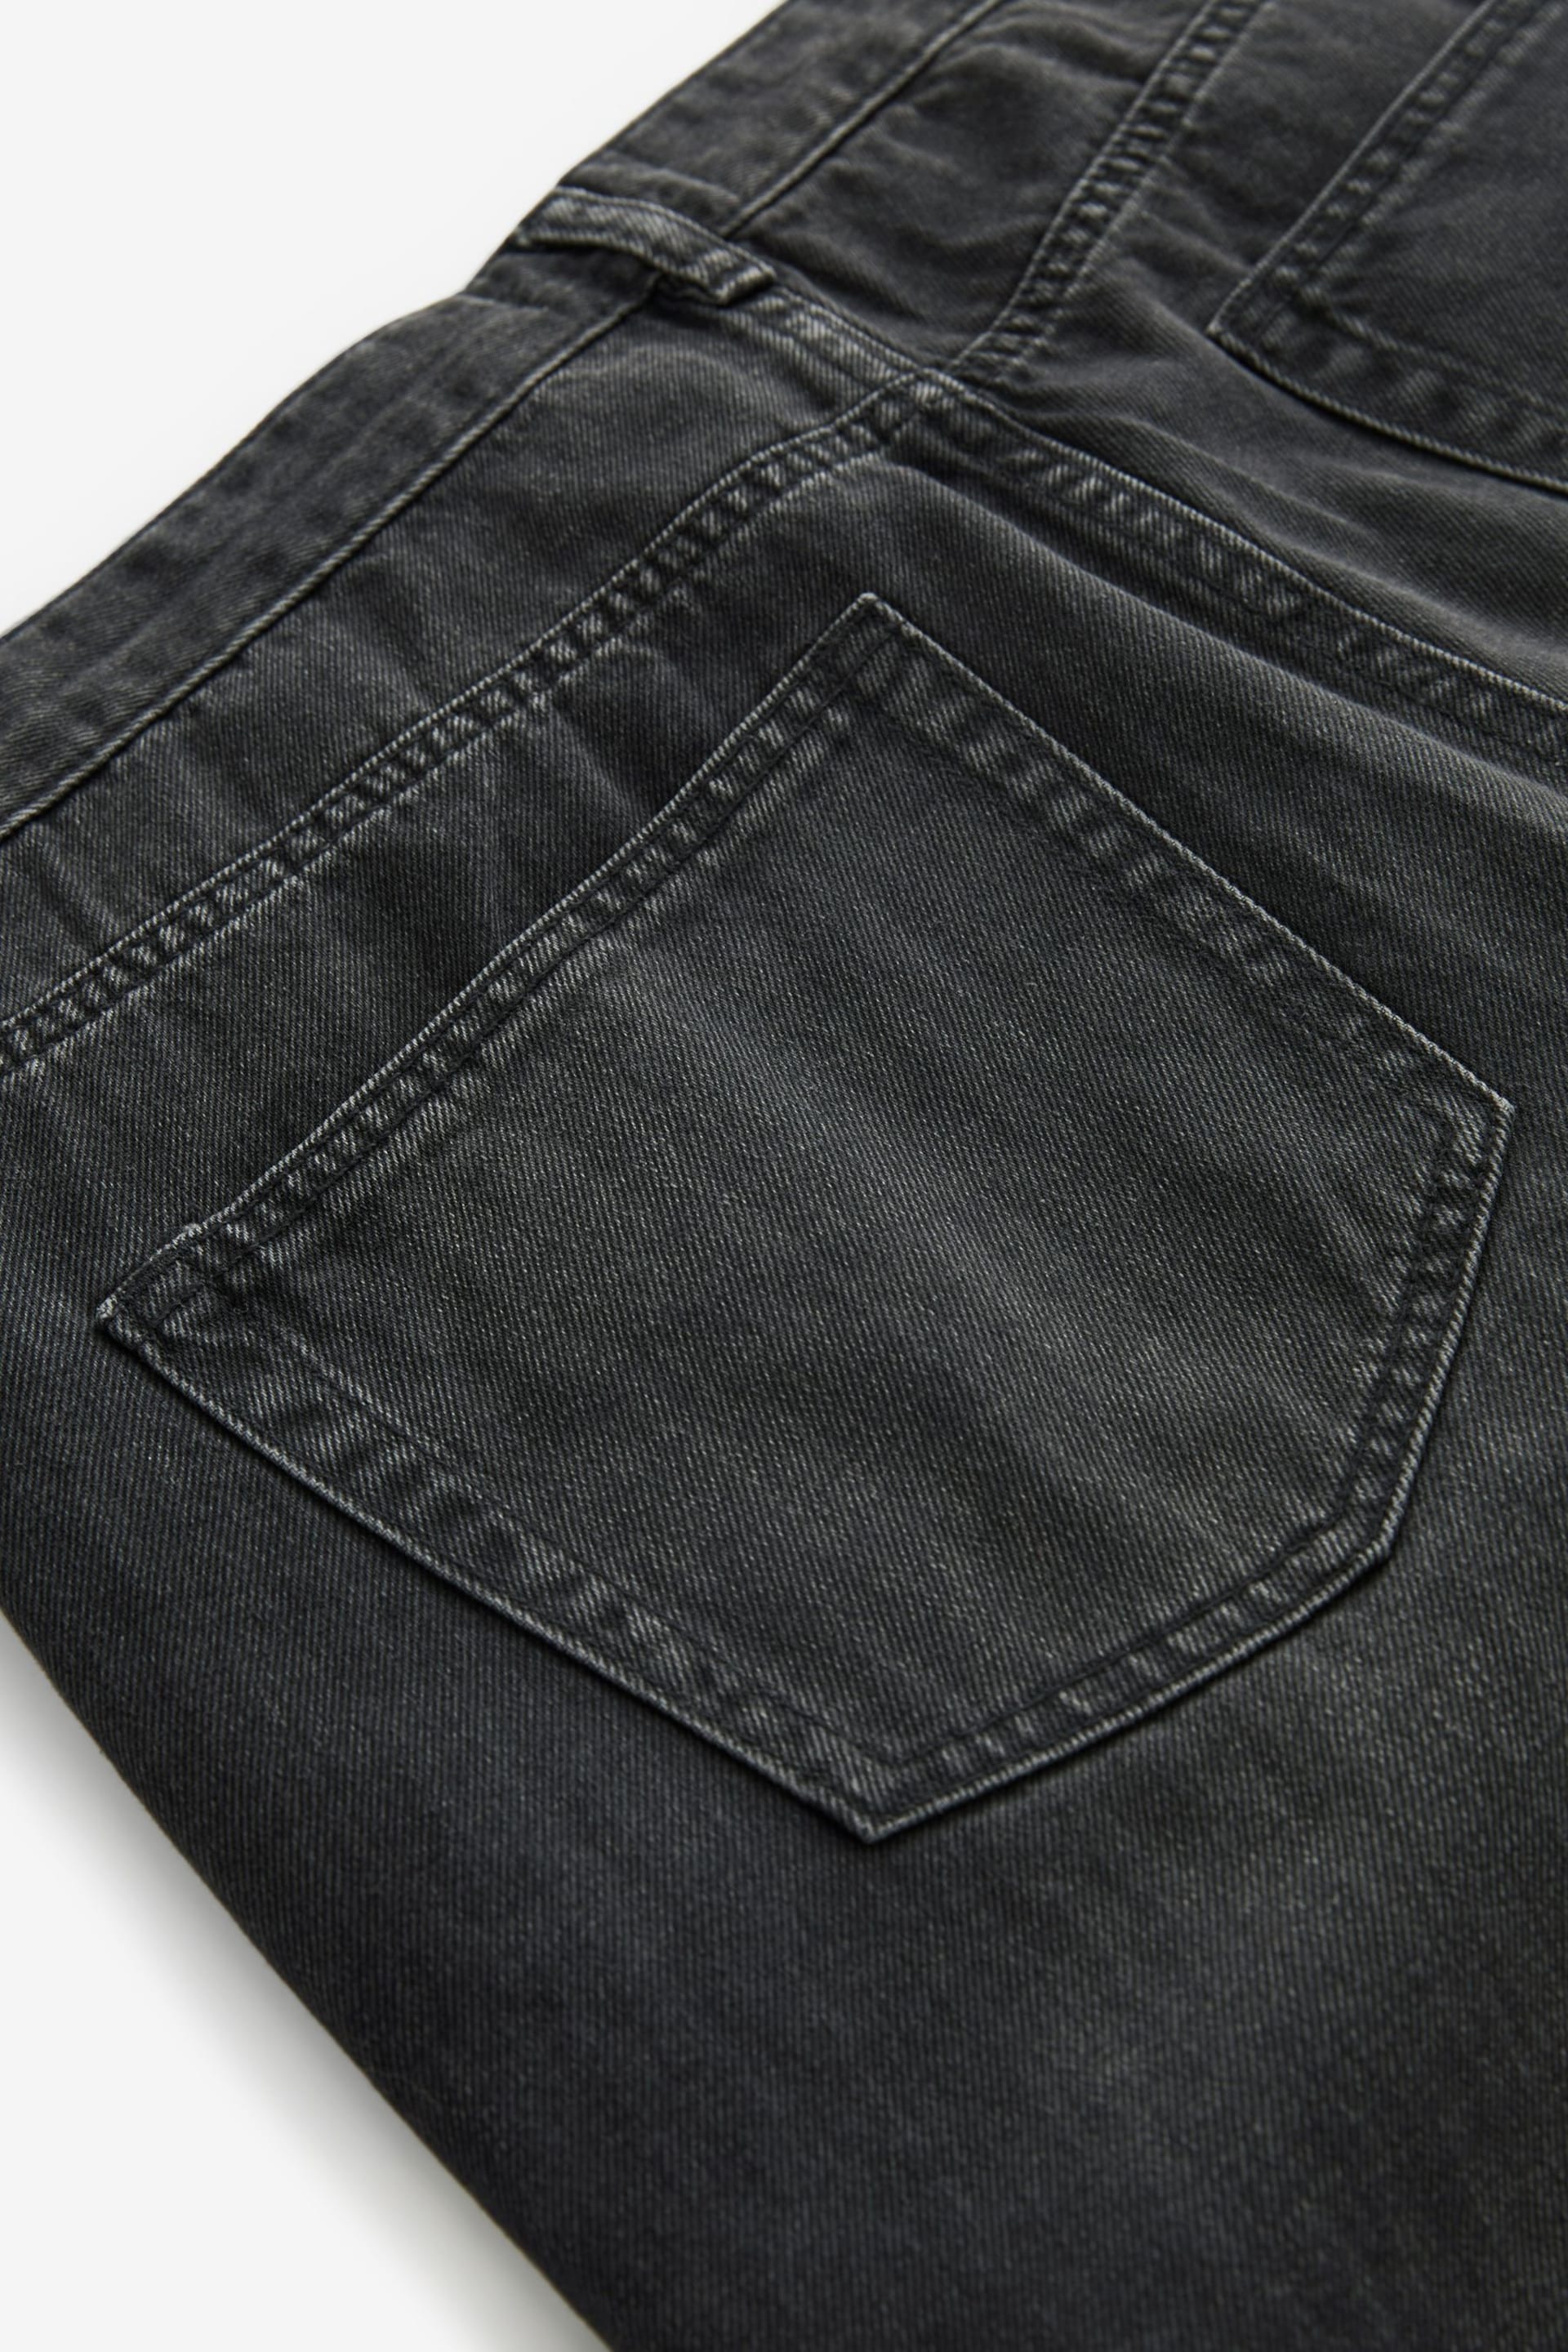 Black Washed Slim Fit 100% Cotton Authentic Jeans - Image 10 of 11